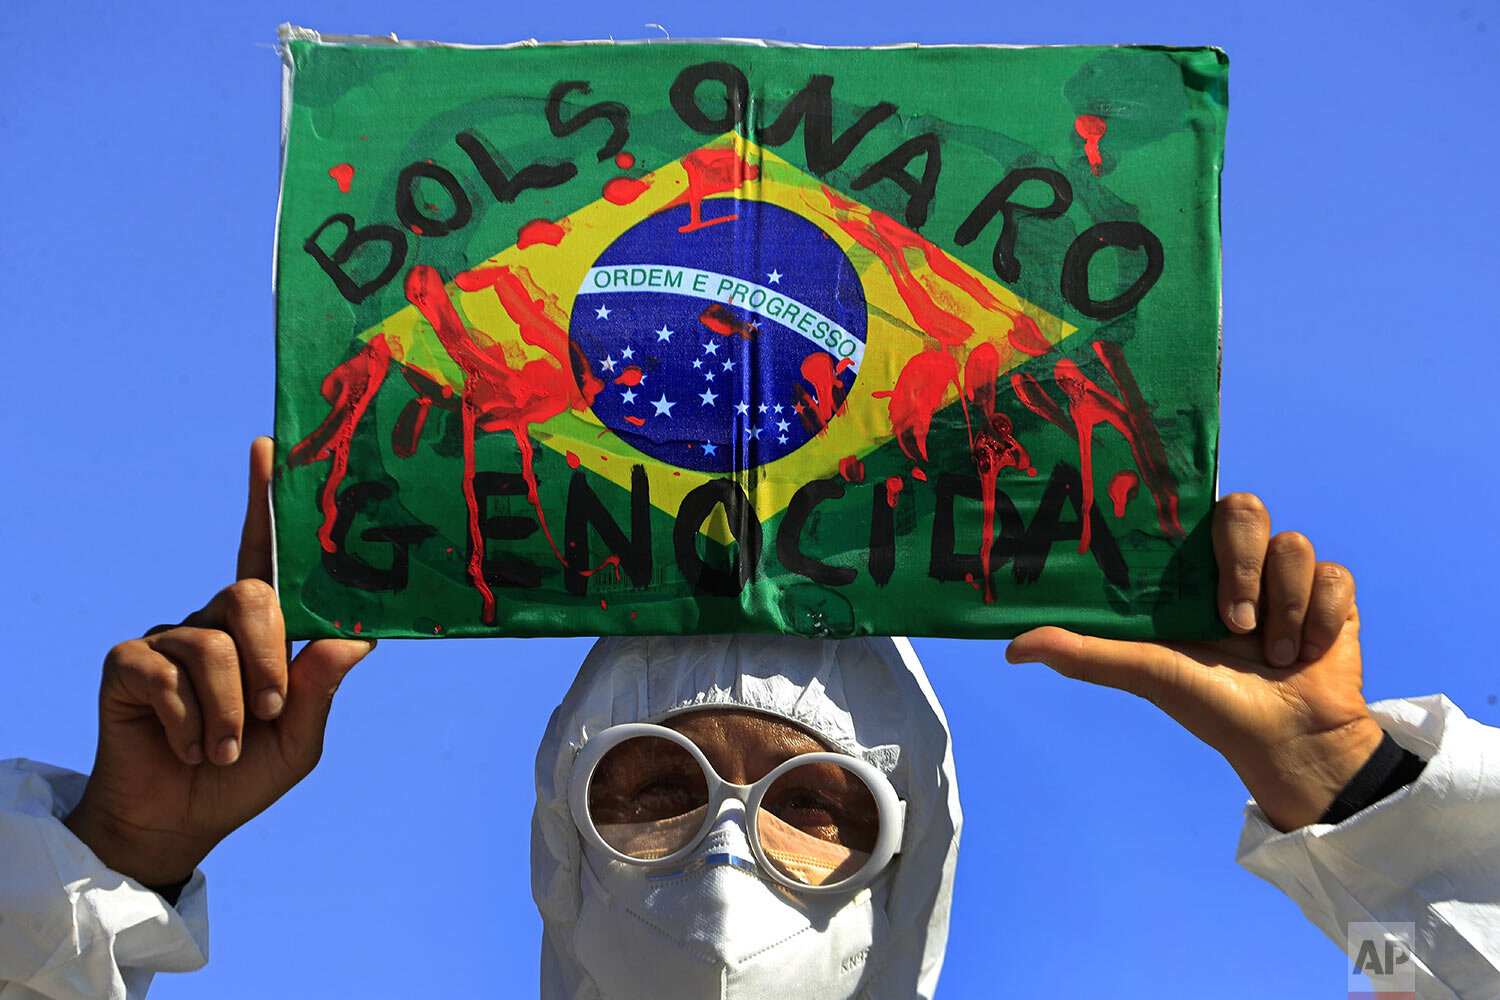  A demonstrator holds an image of the Brazilian flag covered in fake blood and the Portuguese phrase "Bolsonaro Genocide" during an anti-government protest by unions against President Jair Bolsonaro's policies to fight the COVID-19 pandemic in Brasil